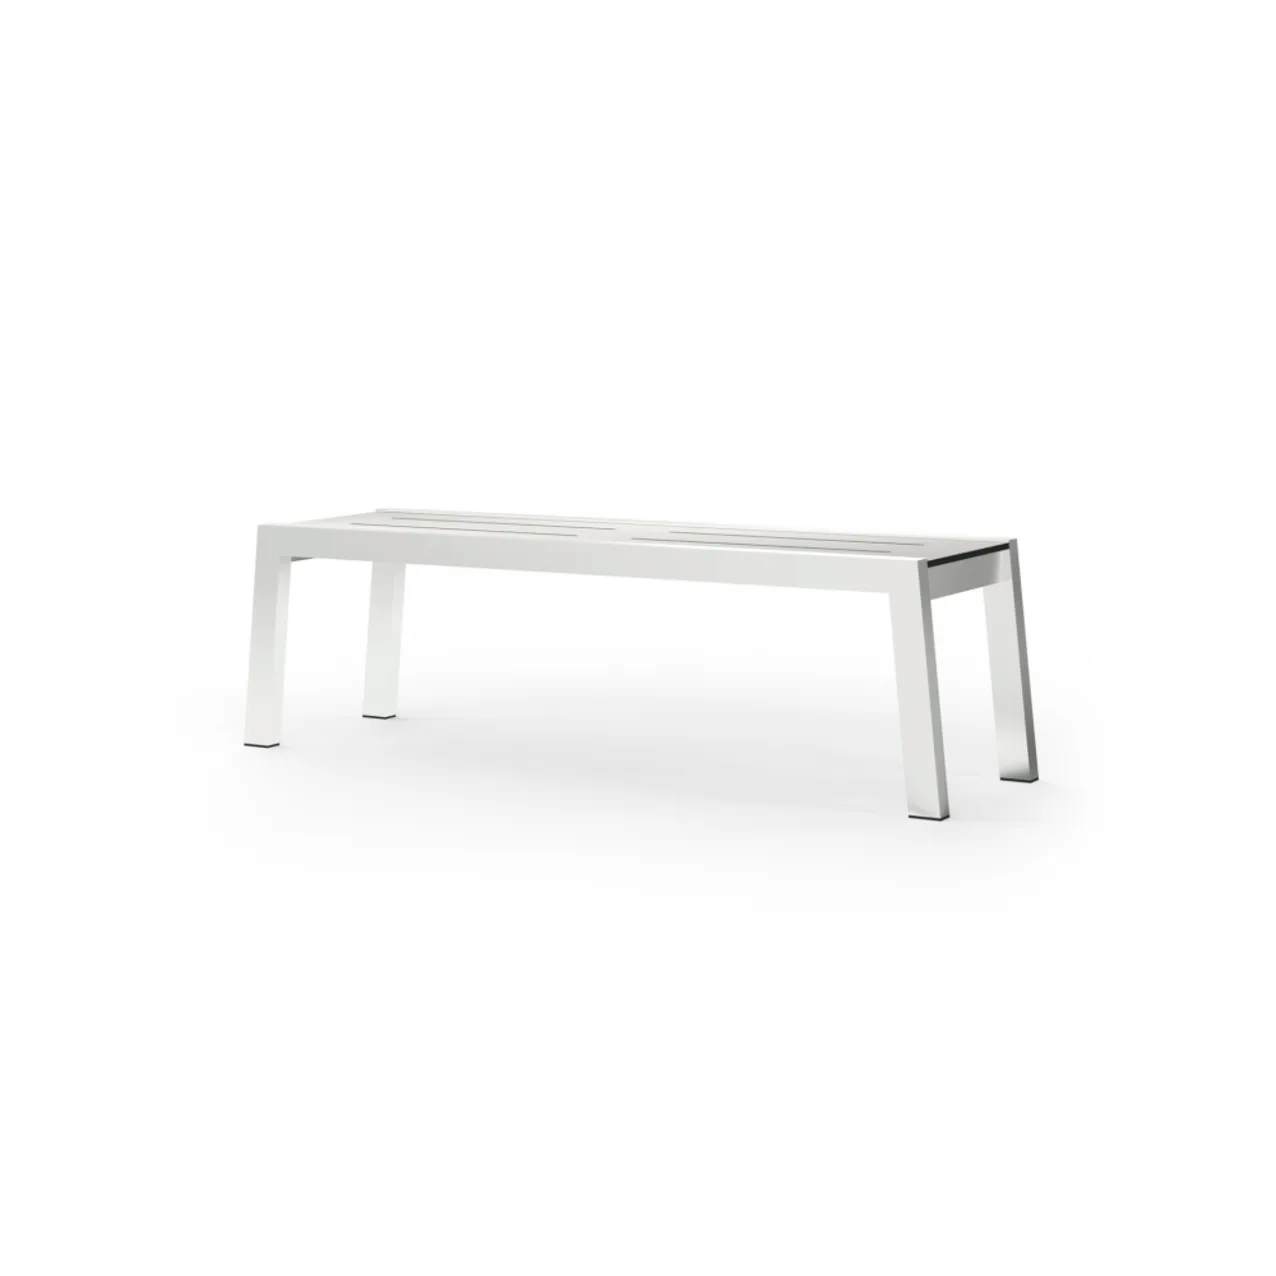 MAMAGREEN Baia 57" Bench | Frame: Stainless Steel | Seat: HPL, Alpes White